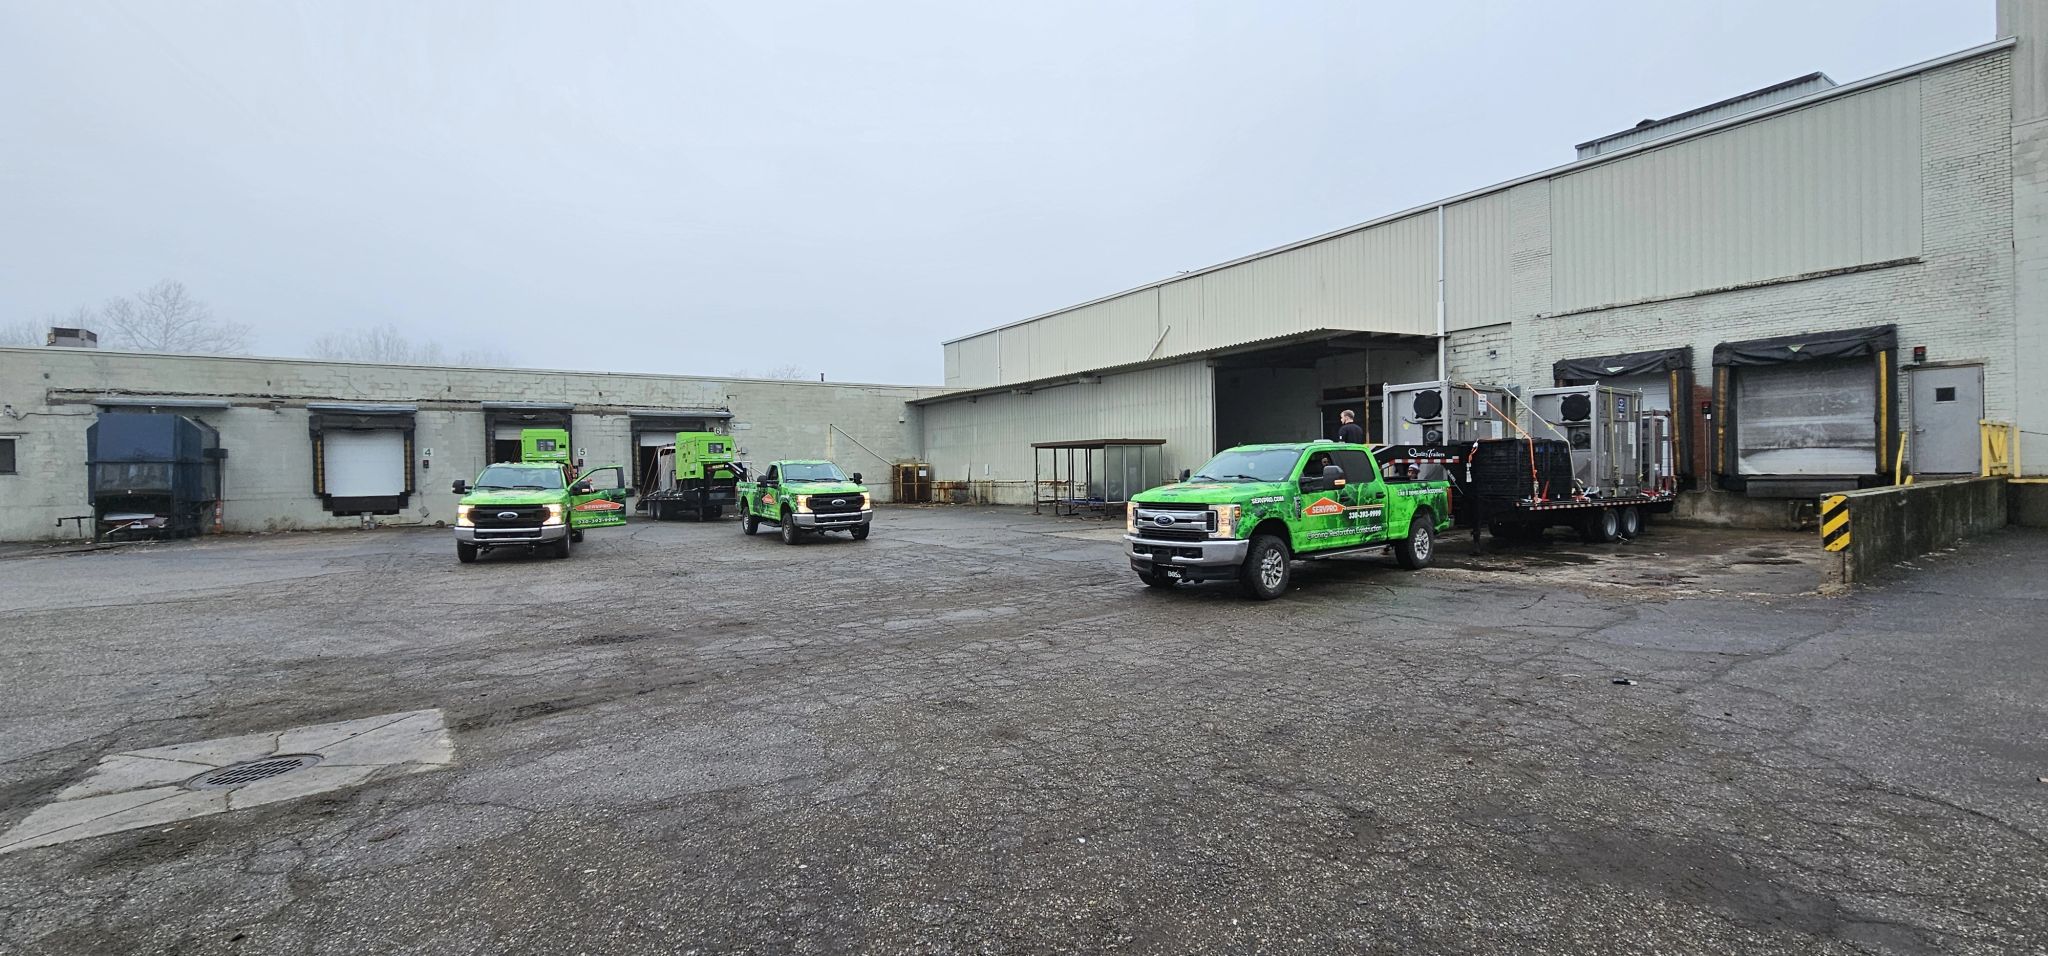 servpro restores water damage in commercial facility by hooking up equipment